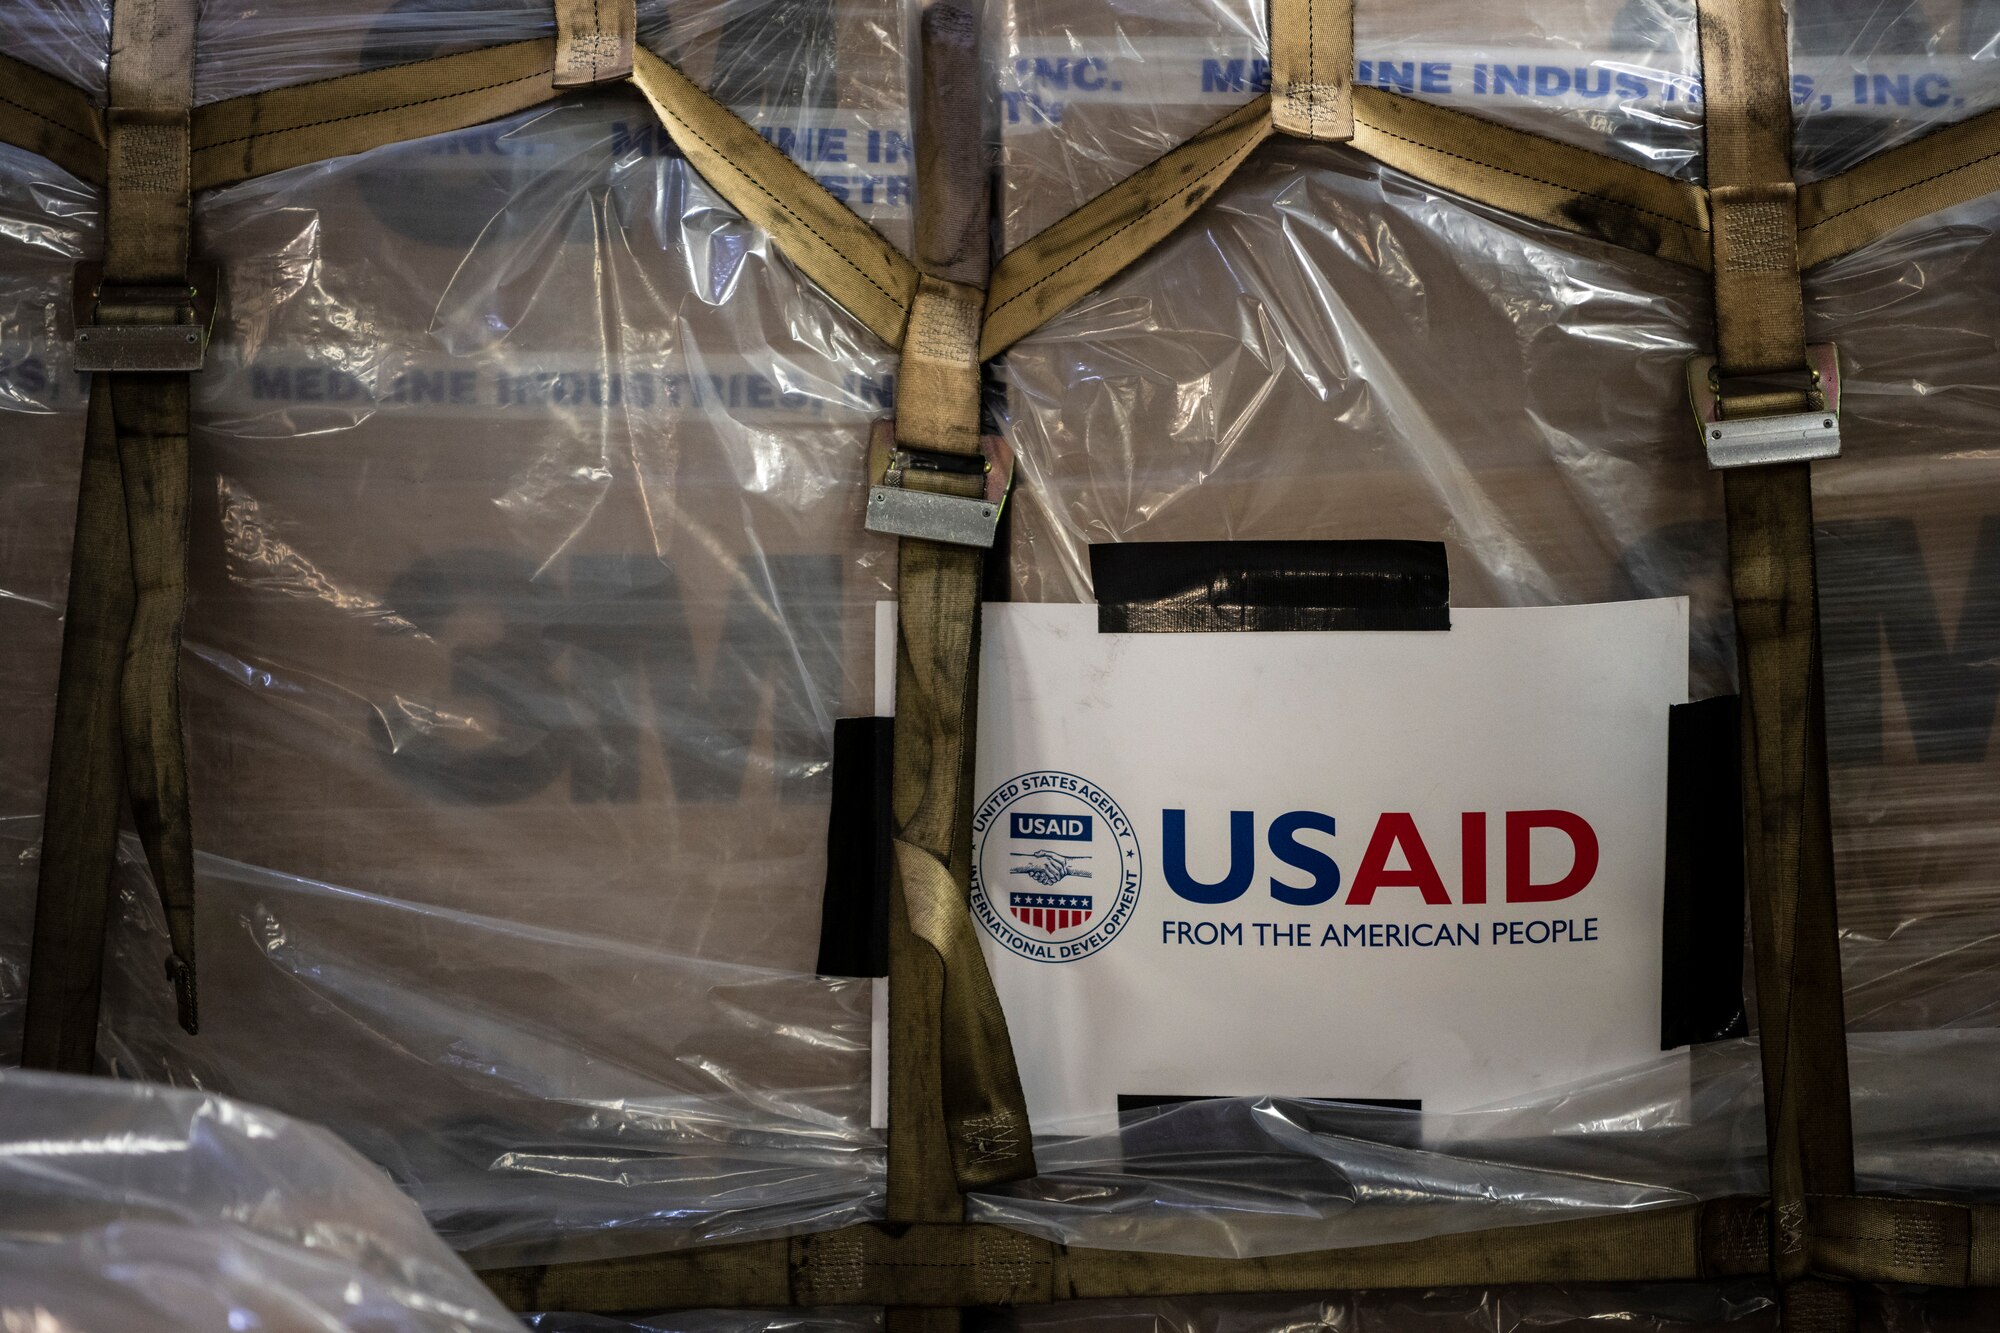 A sign reading USAID is attached to a pallet.